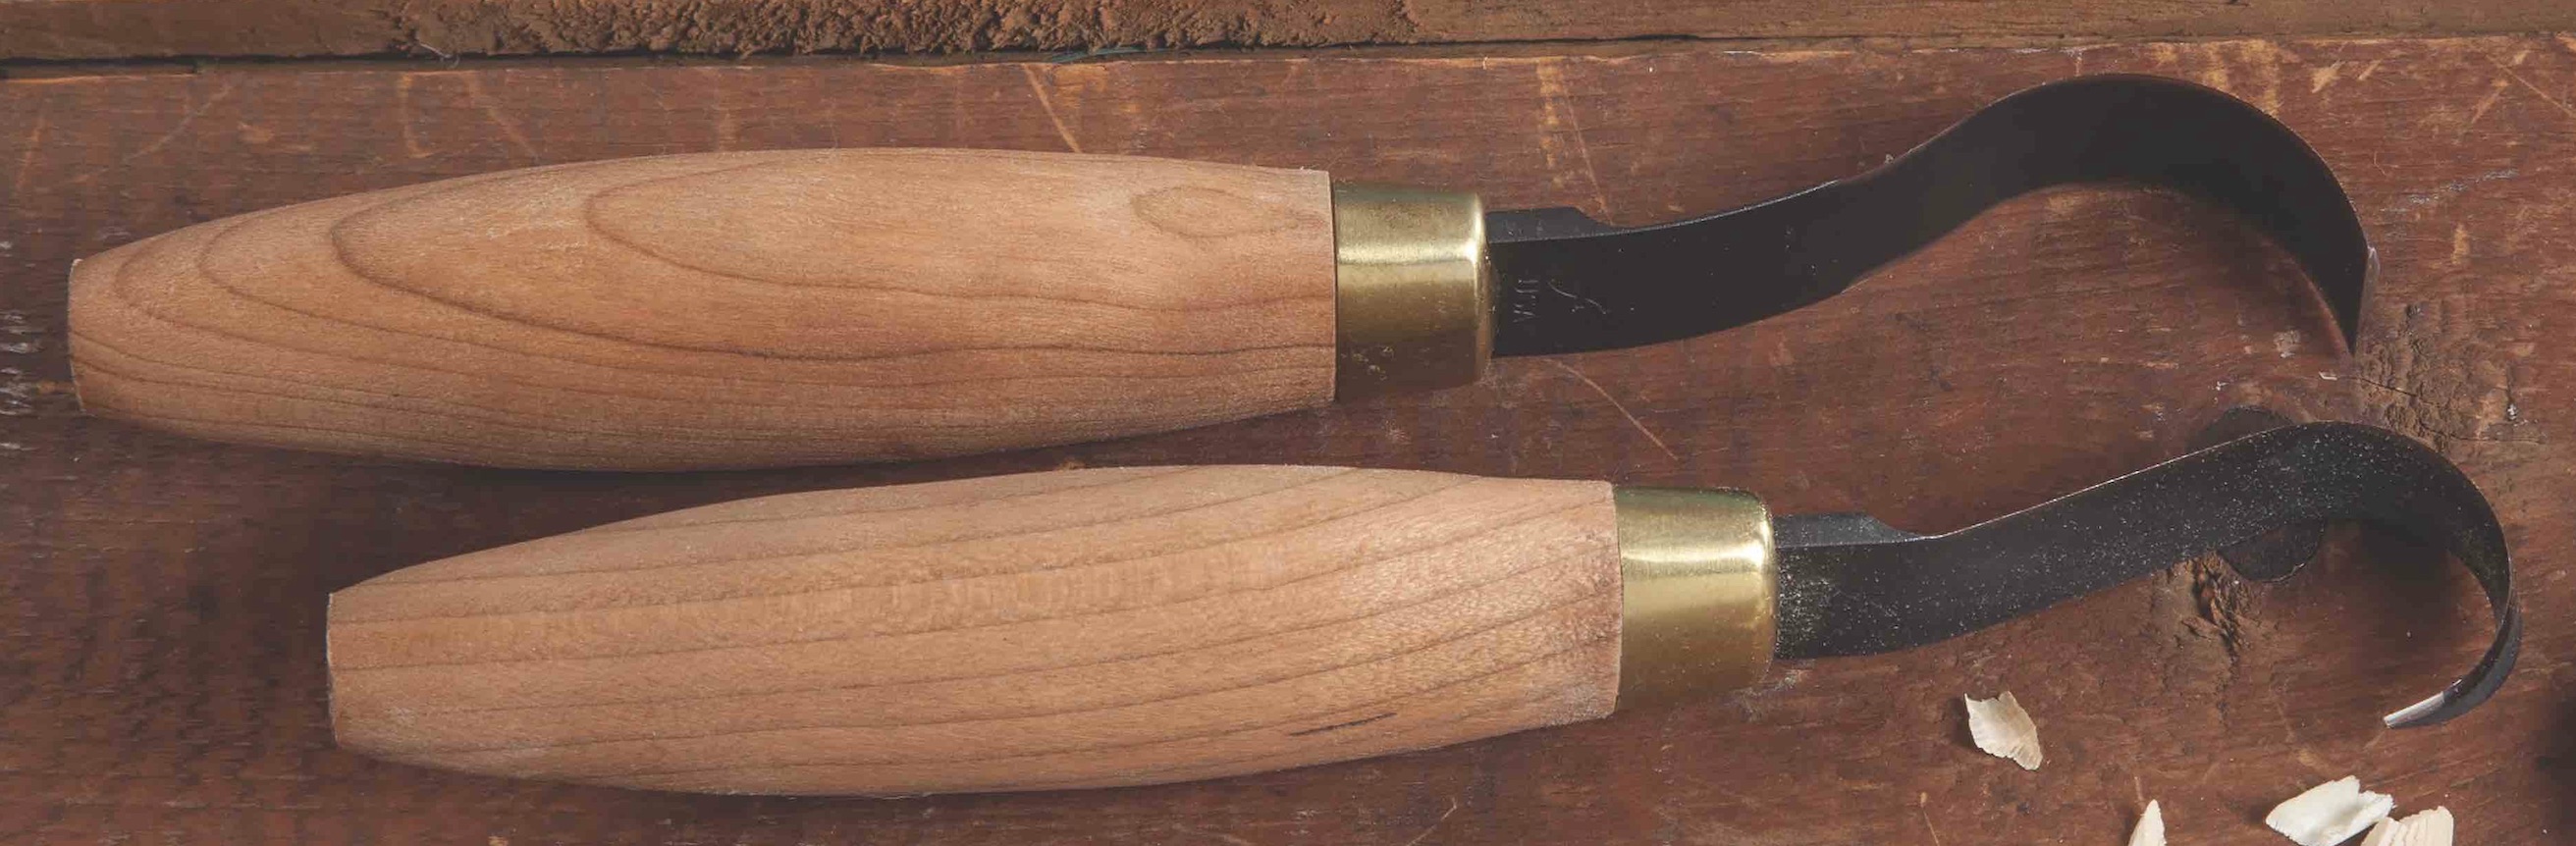 A sloyd knife that lets you get in - Flexcut Carving Tools